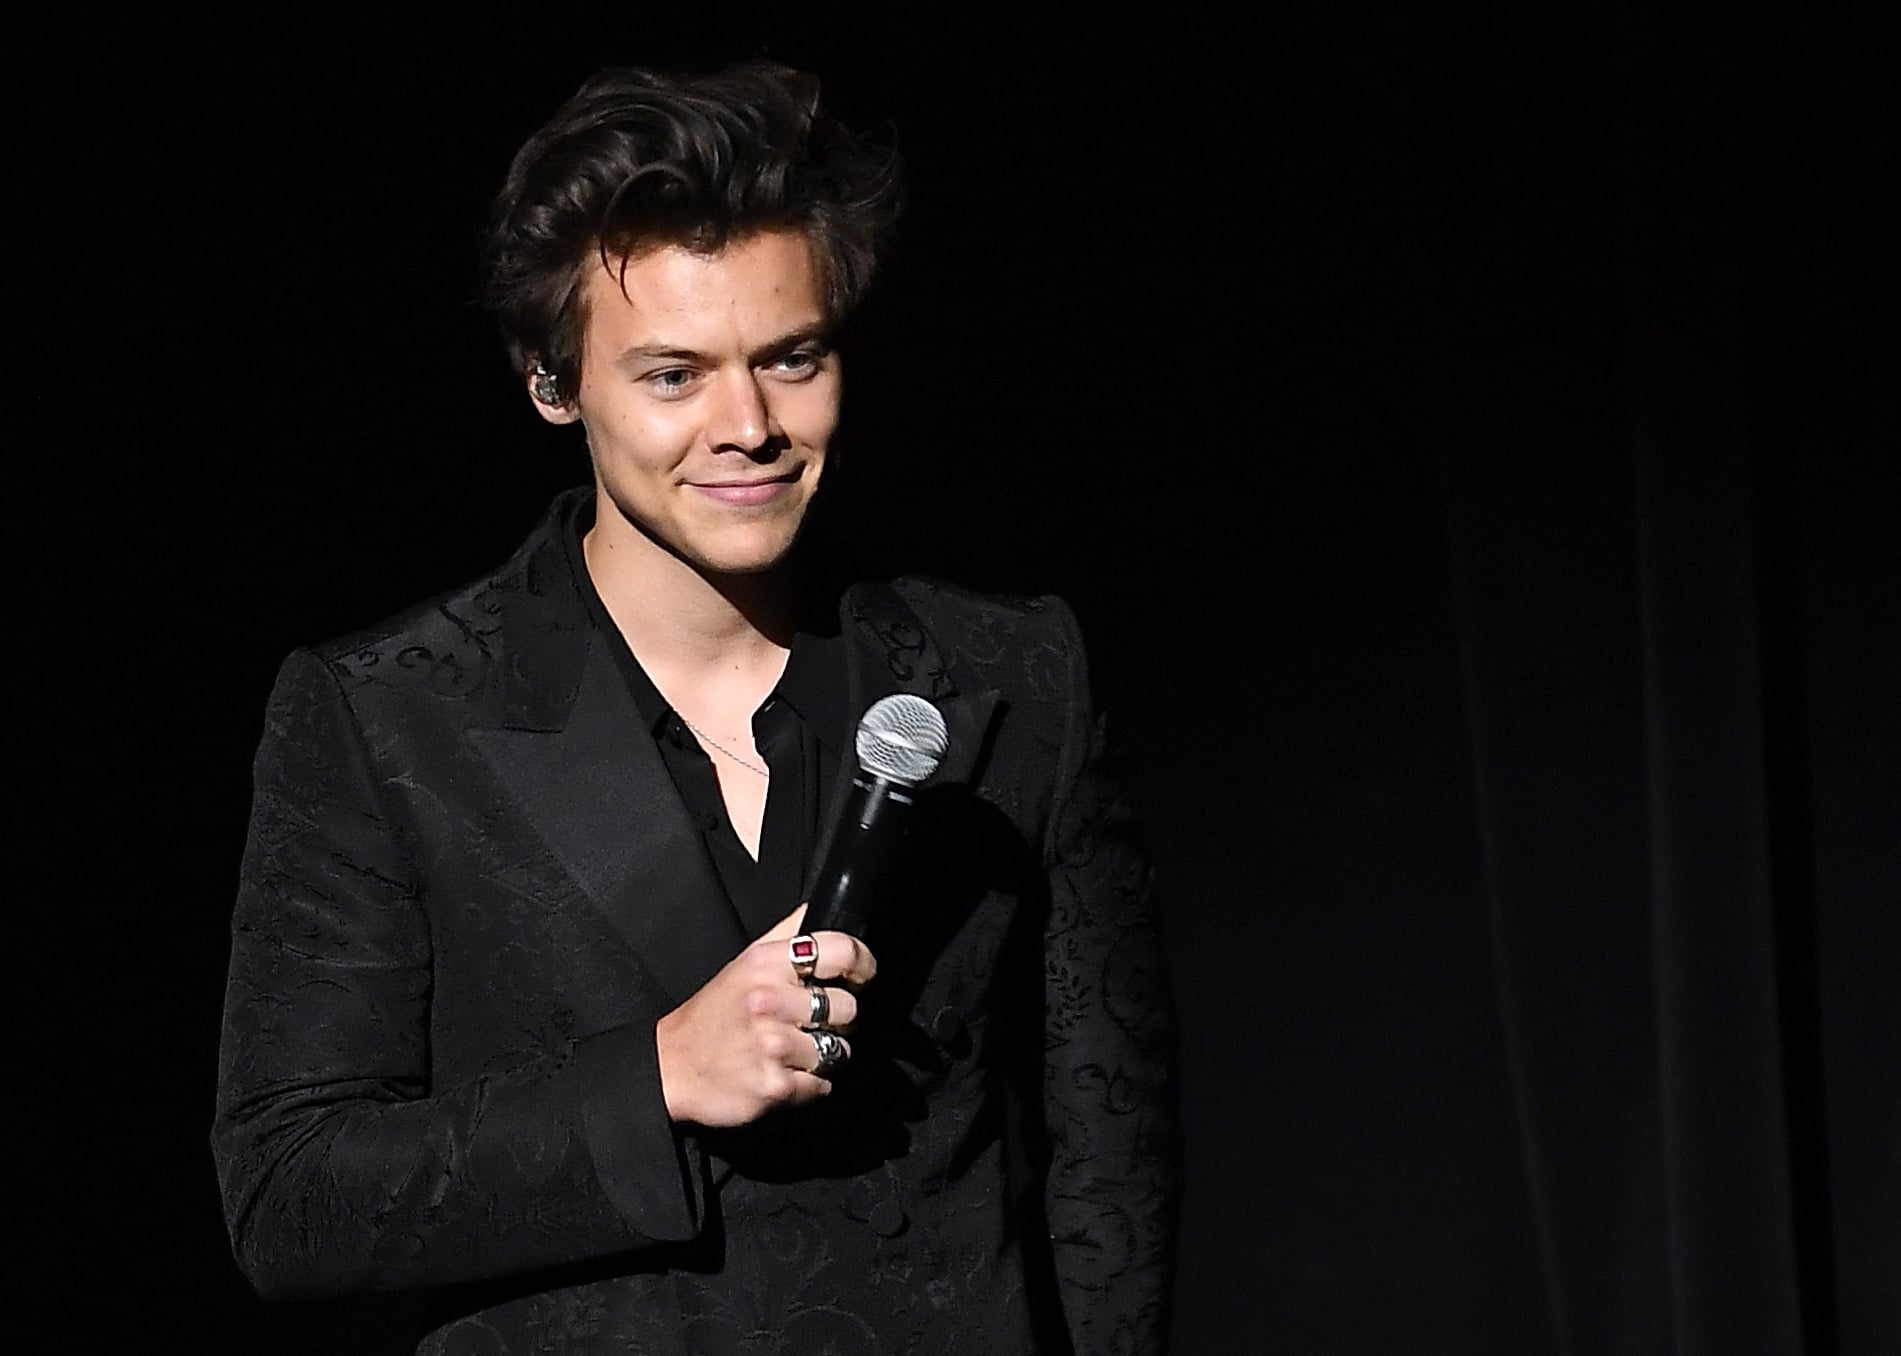 Musician/actor Harry Styles performs at the 2018 MusiCares Person Of The Year gala at Radio City Music Hall in New York on January 26, 2018.The 2018 MusiCares Person of the Year award was presented to Fleetwood Mac at the 28th annual MusiCares Gala Tribute dinner and concert ahead of Sunday's 60th GRAMMY Awards, marking the first time the benefit has honored a band. Proceeds from the event go towards MusiCares. / AFP PHOTO / ANGELA WEISS        (Photo credit should read ANGELA WEISS/AFP/Getty Images)